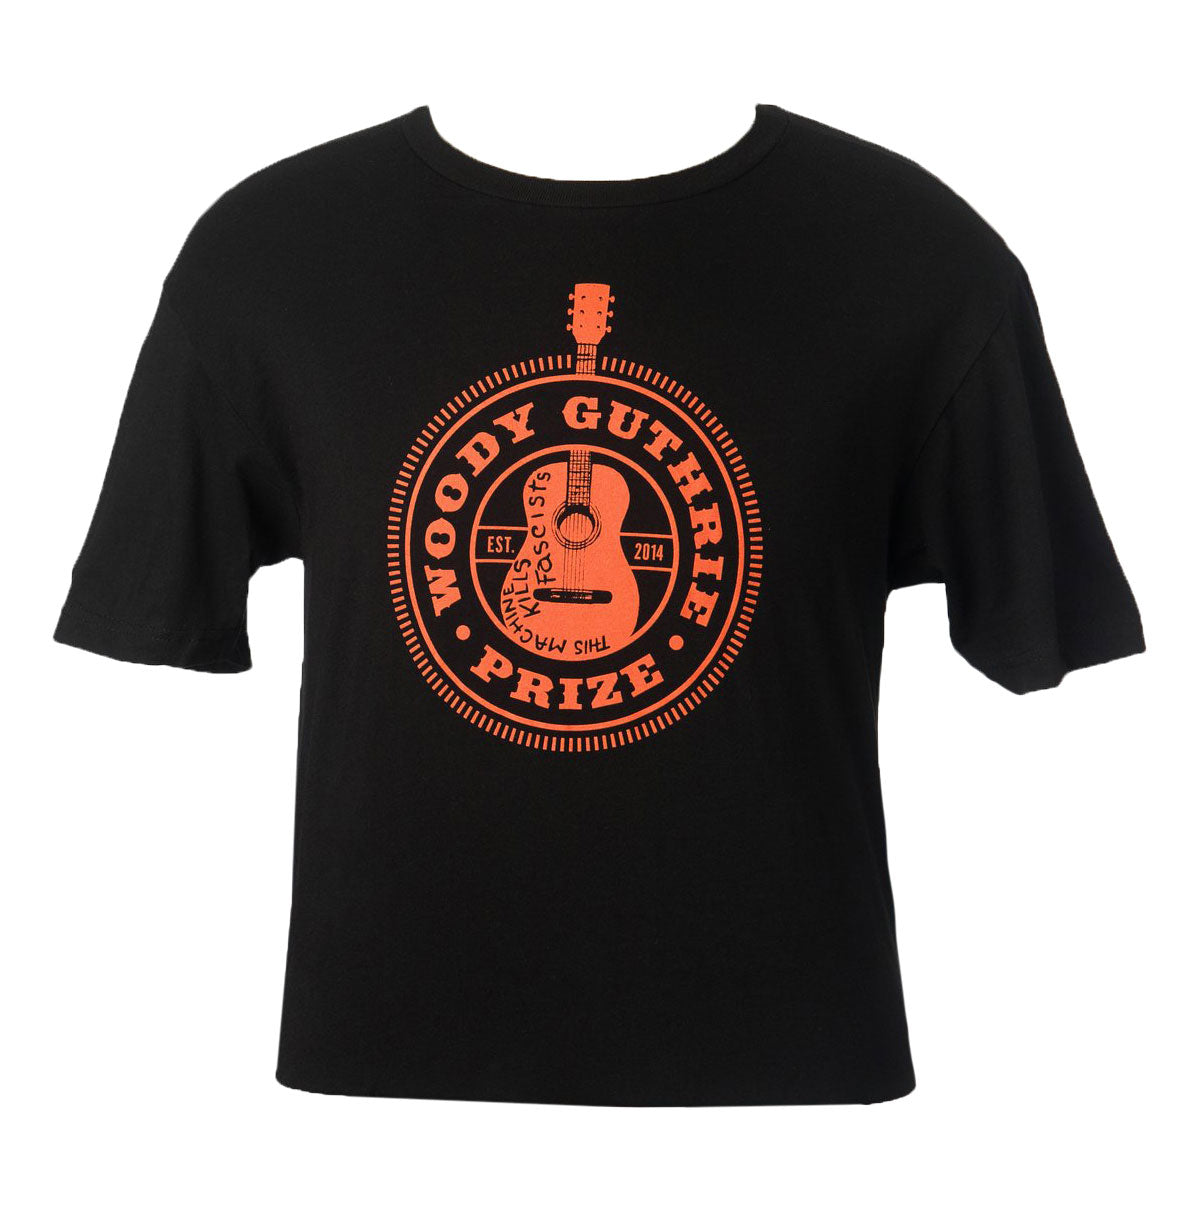 Woody Guthrie Prize Shirt